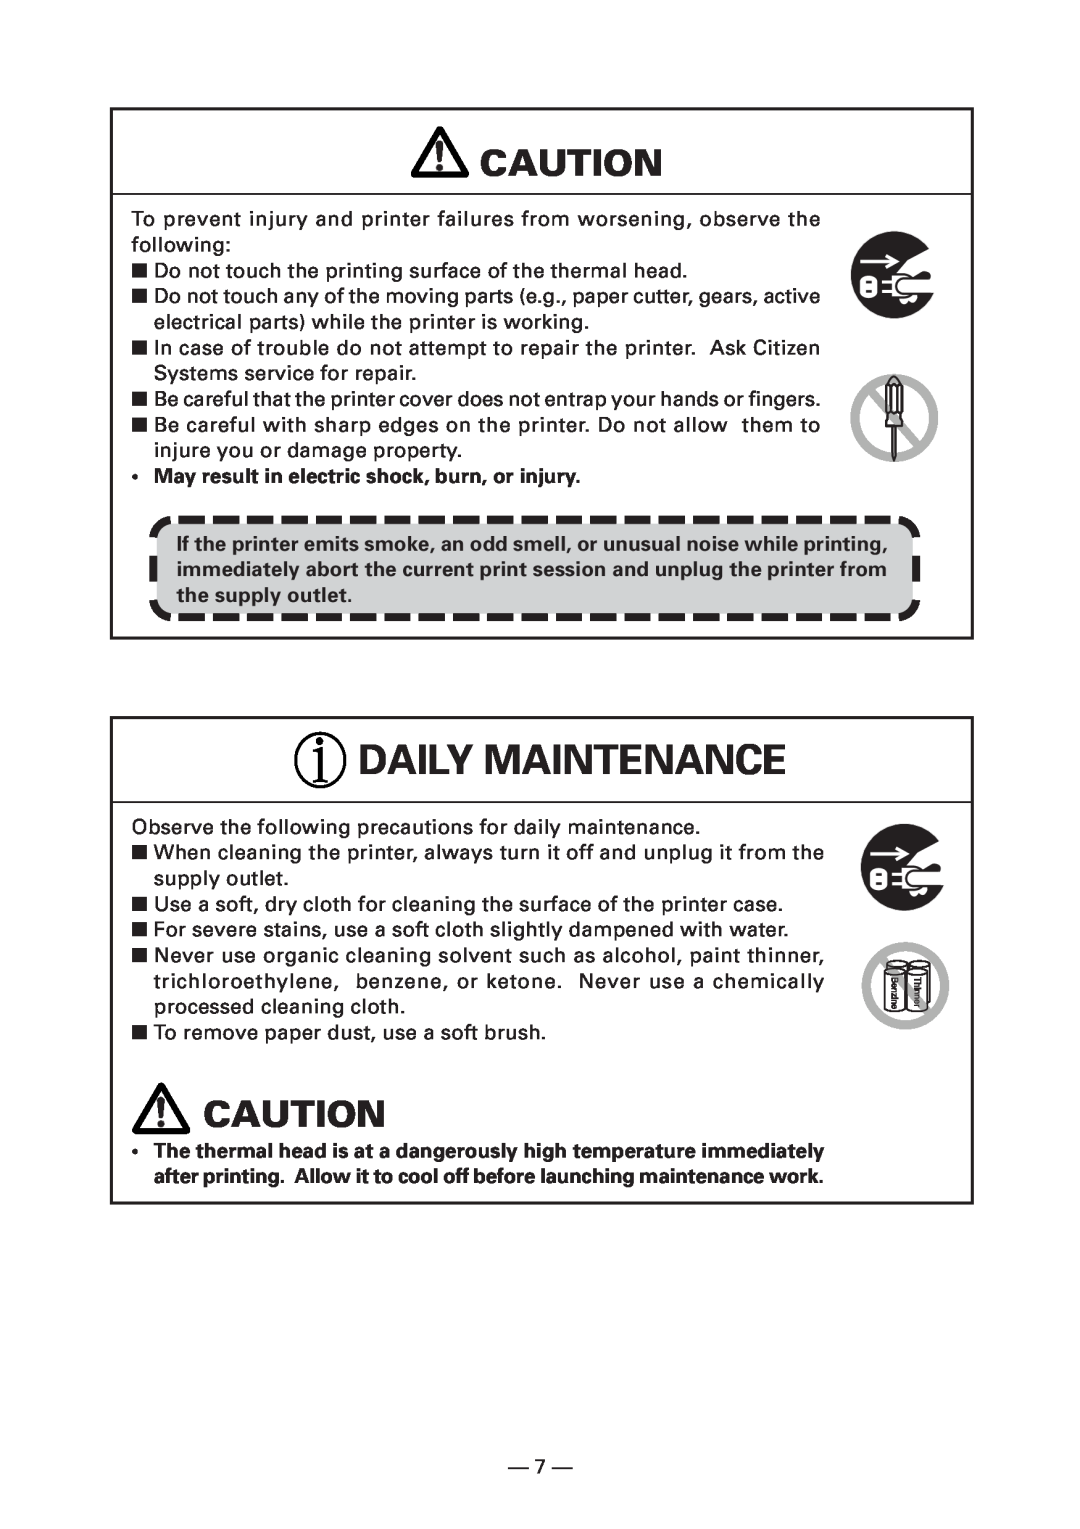 Citizen Systems CT-S4000DC user manual Daily Maintenance, May result in electric shock, burn, or injury 